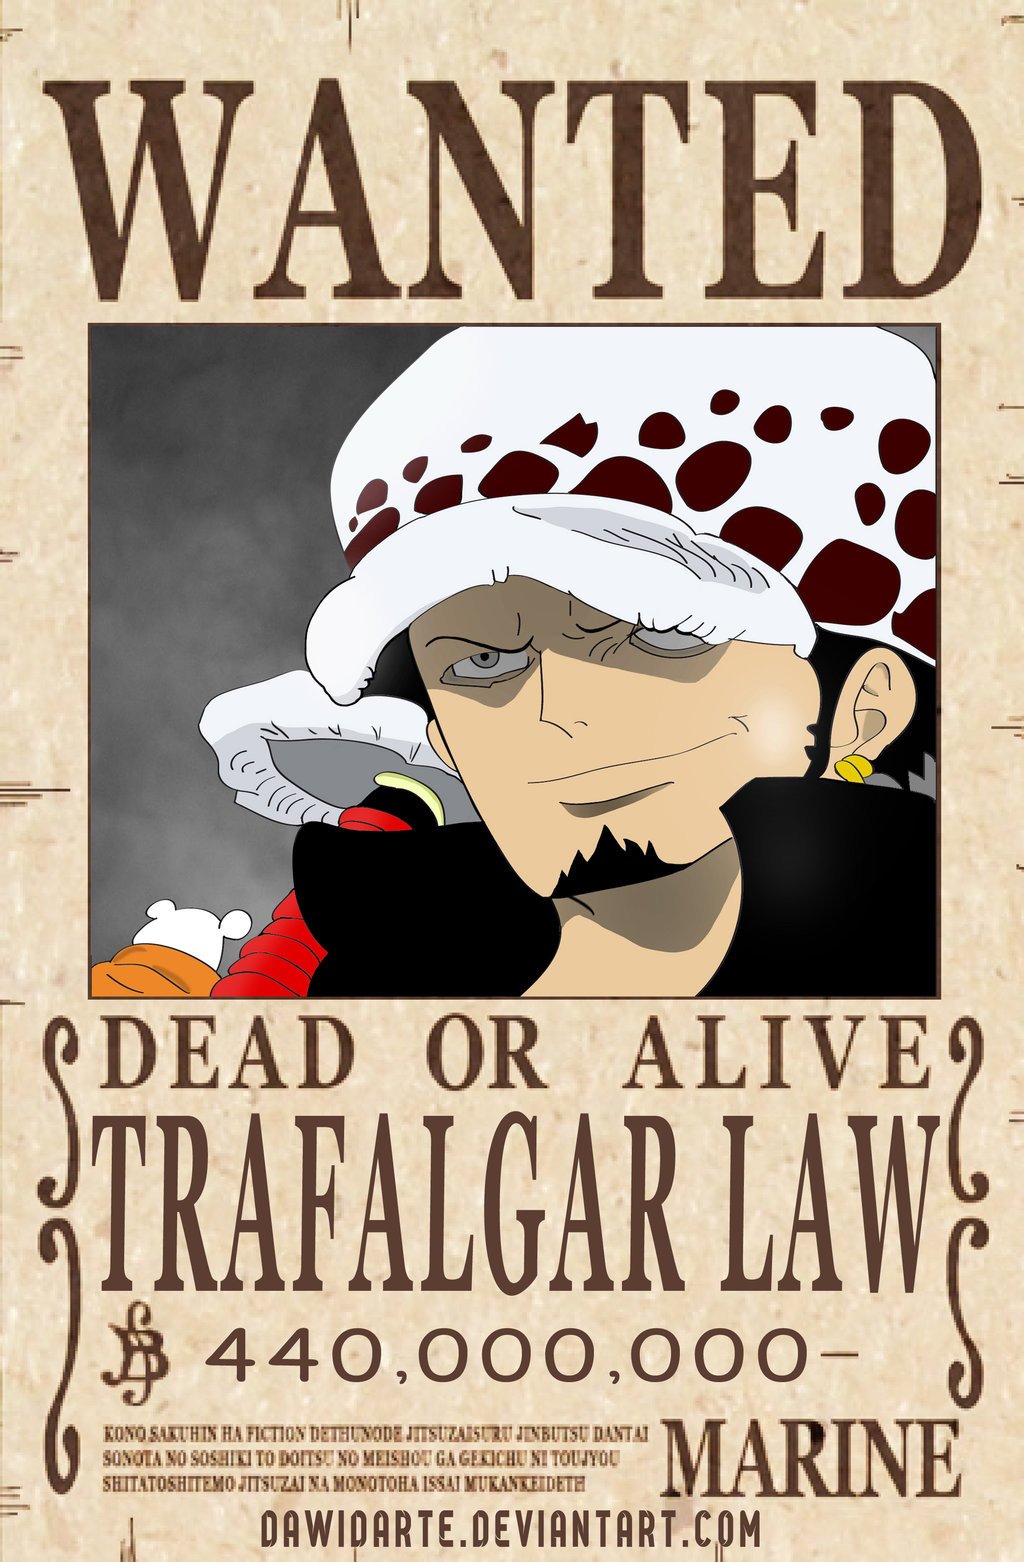 e Piece Trafalgar Law ficial Wanted Poster by